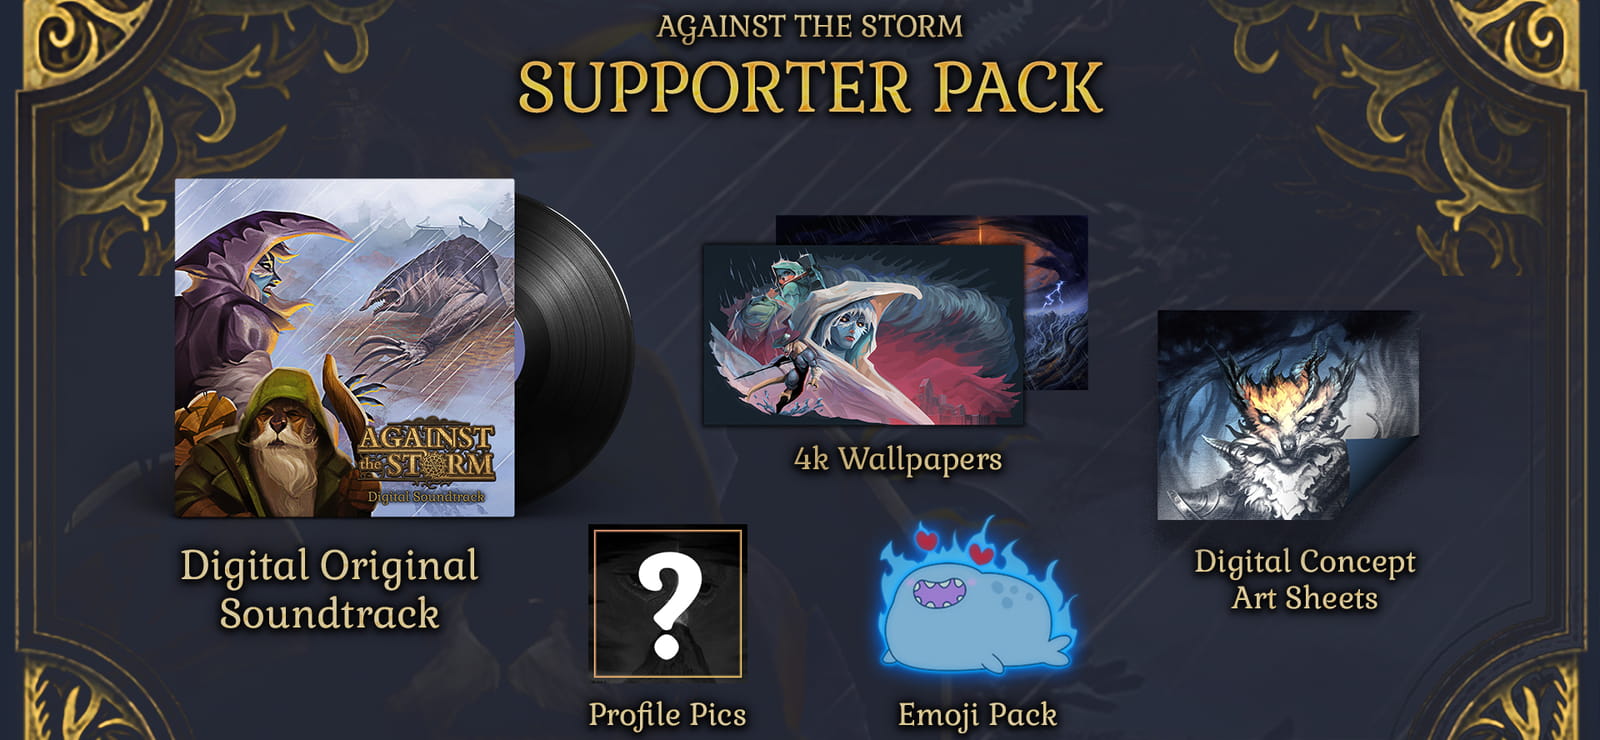 Against The Storm Supporter Pack